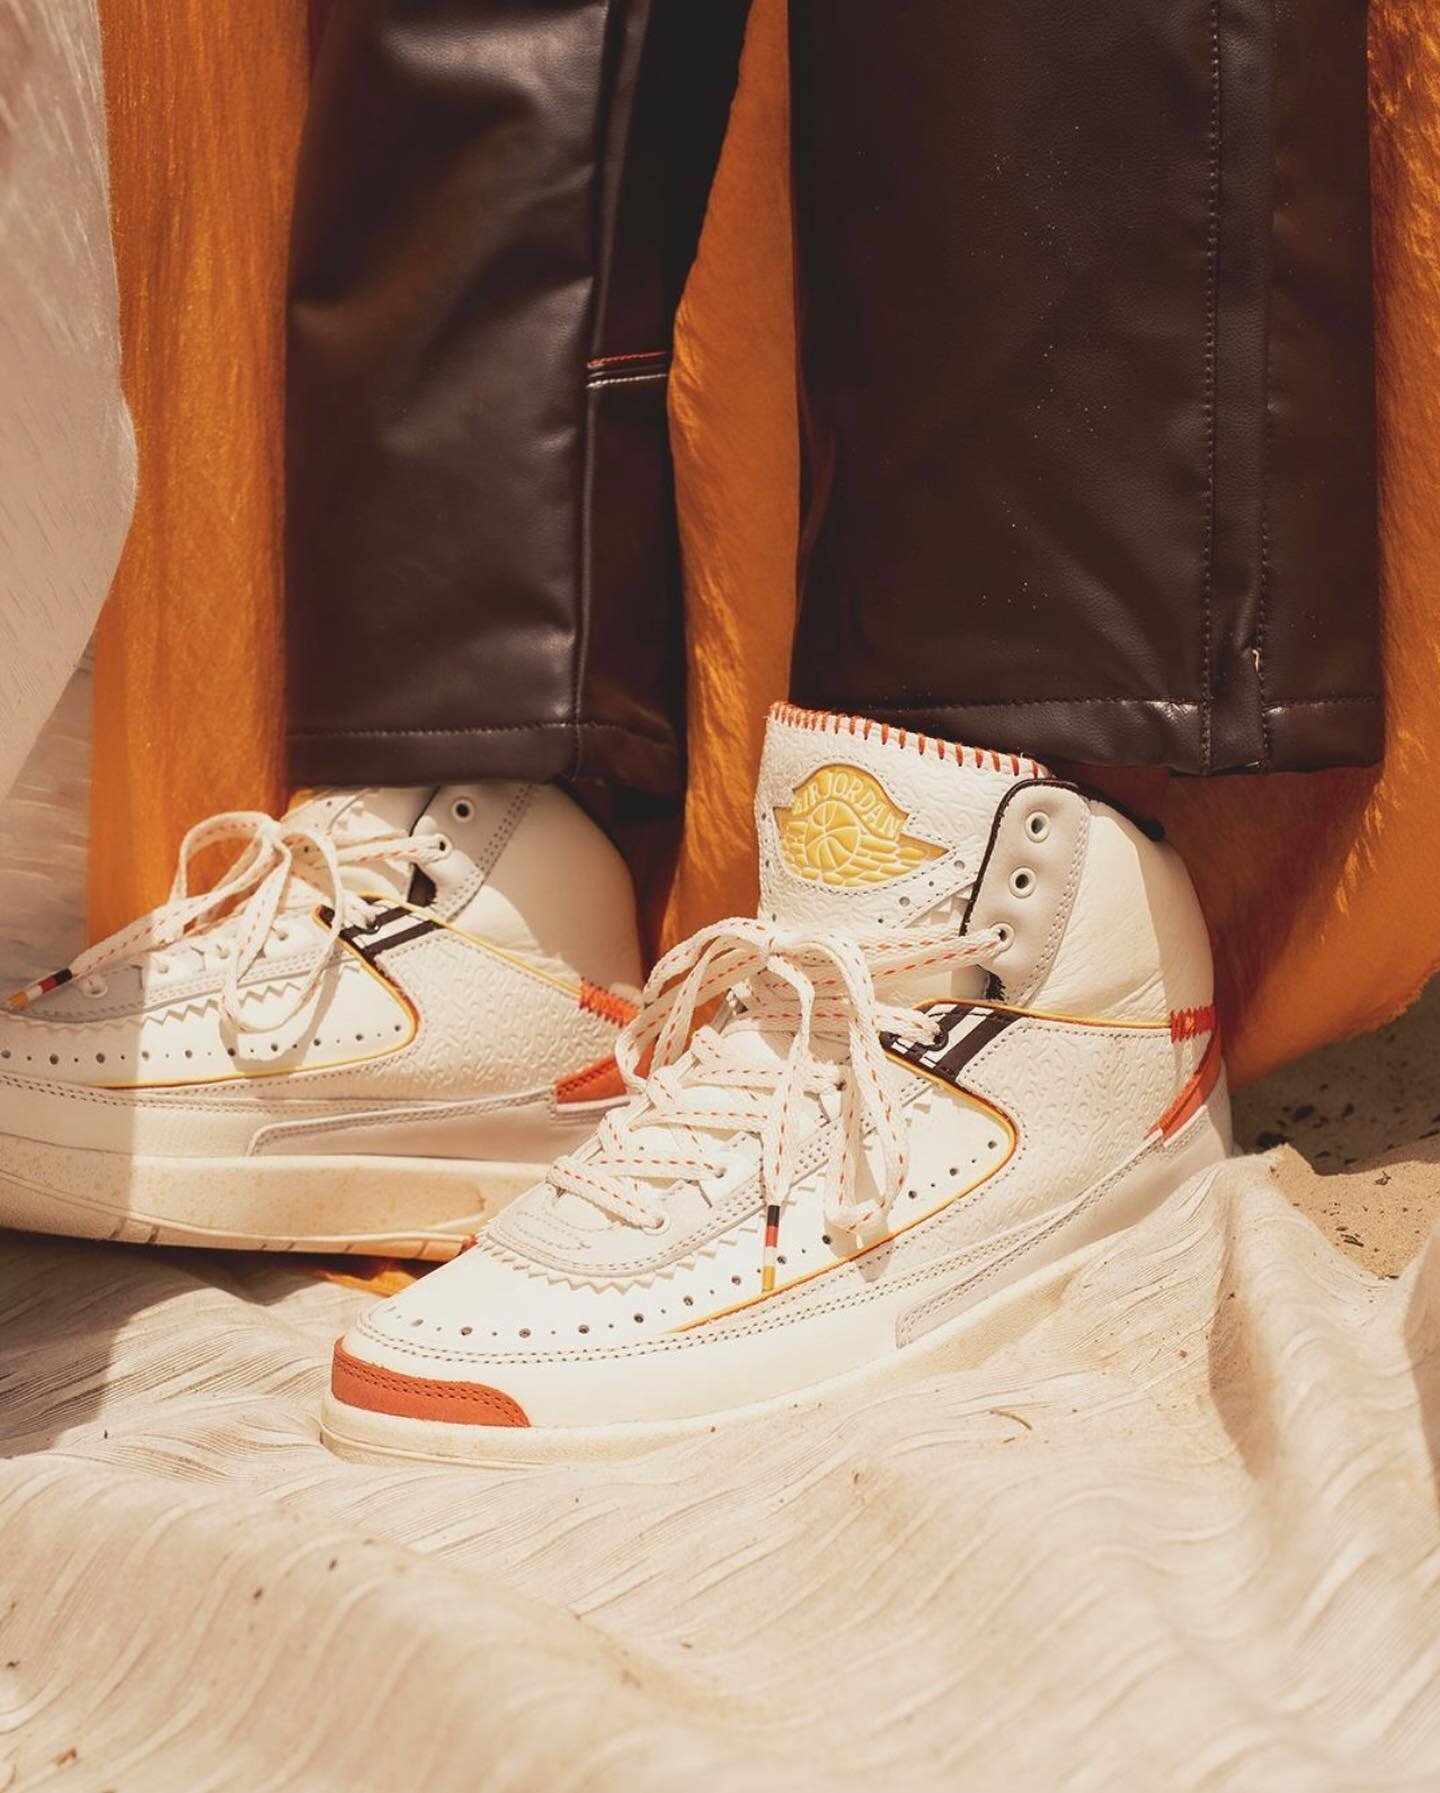 Momentum behind the #jordan2 continues with @maisonchateaurouge sharing their edit of the sneaker. Dressed in playful textures and brogue-styled trims, these bold yet subdued features will certainly leave an impression. Look for the Maison Ch&acirc;t